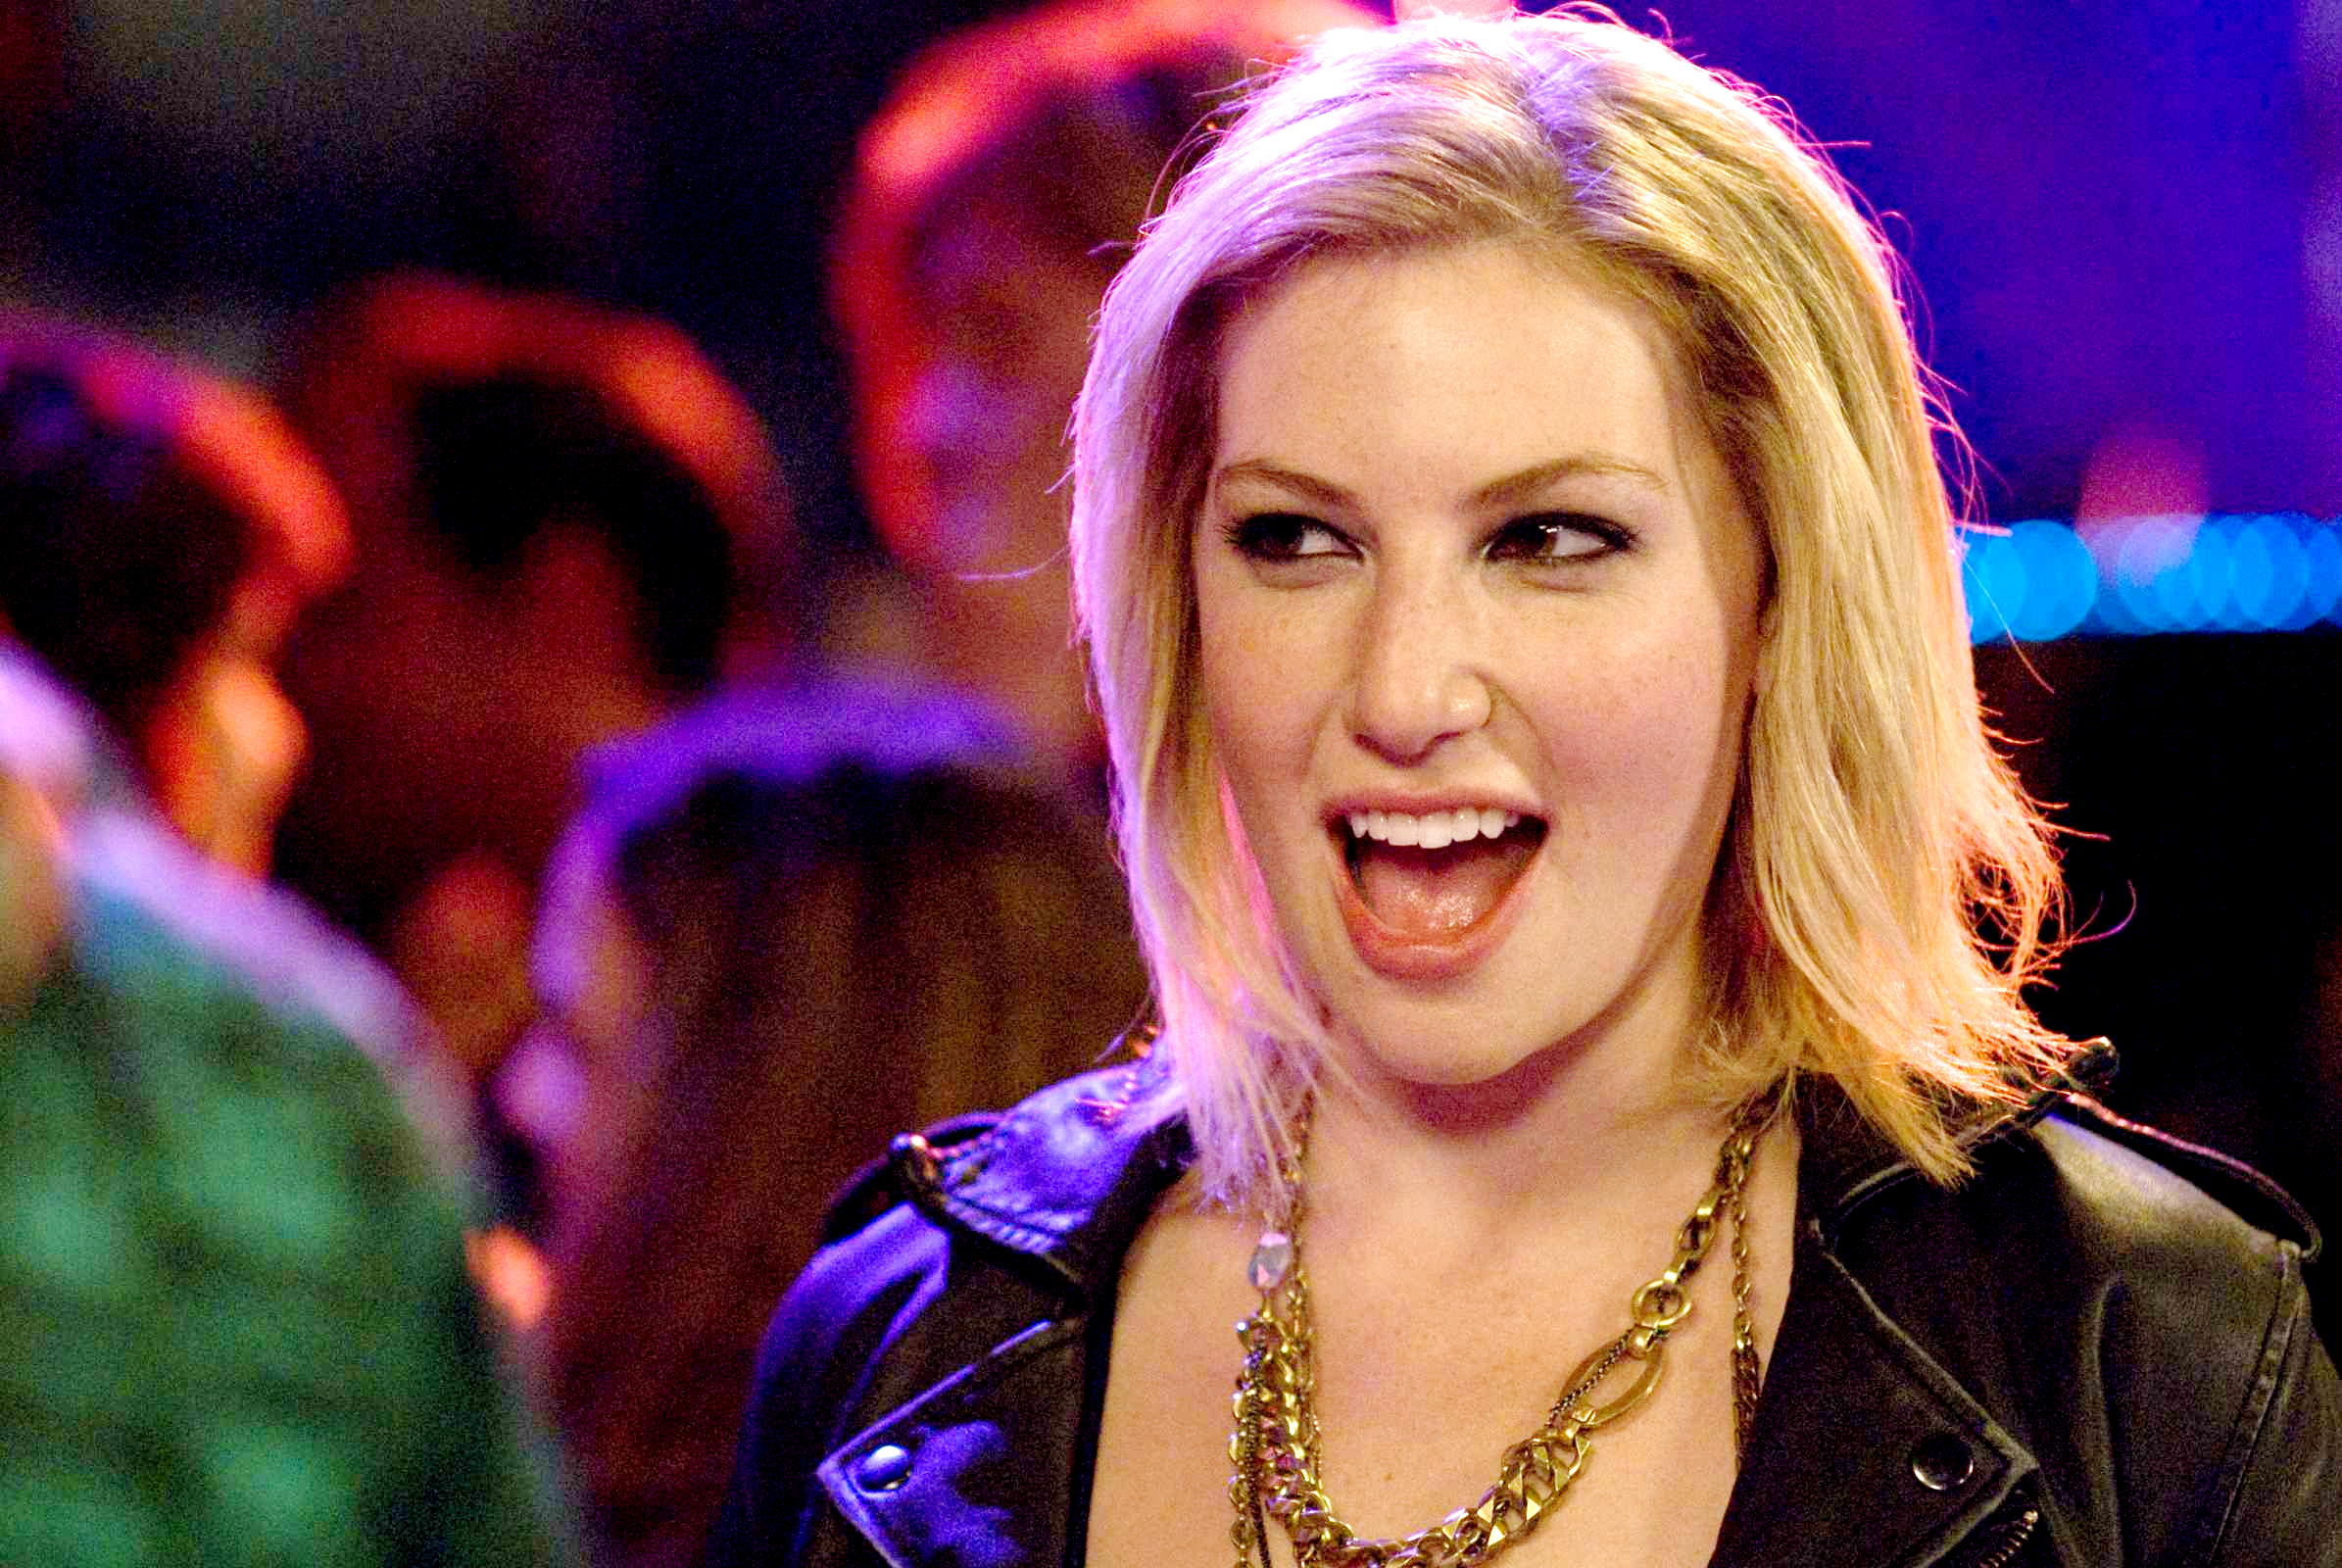 Ari Graynor stars as Caroline in Sony Pictures' Nick and Norah's Infinite Playlist (2008). Photo credit by K.C. Bailey.